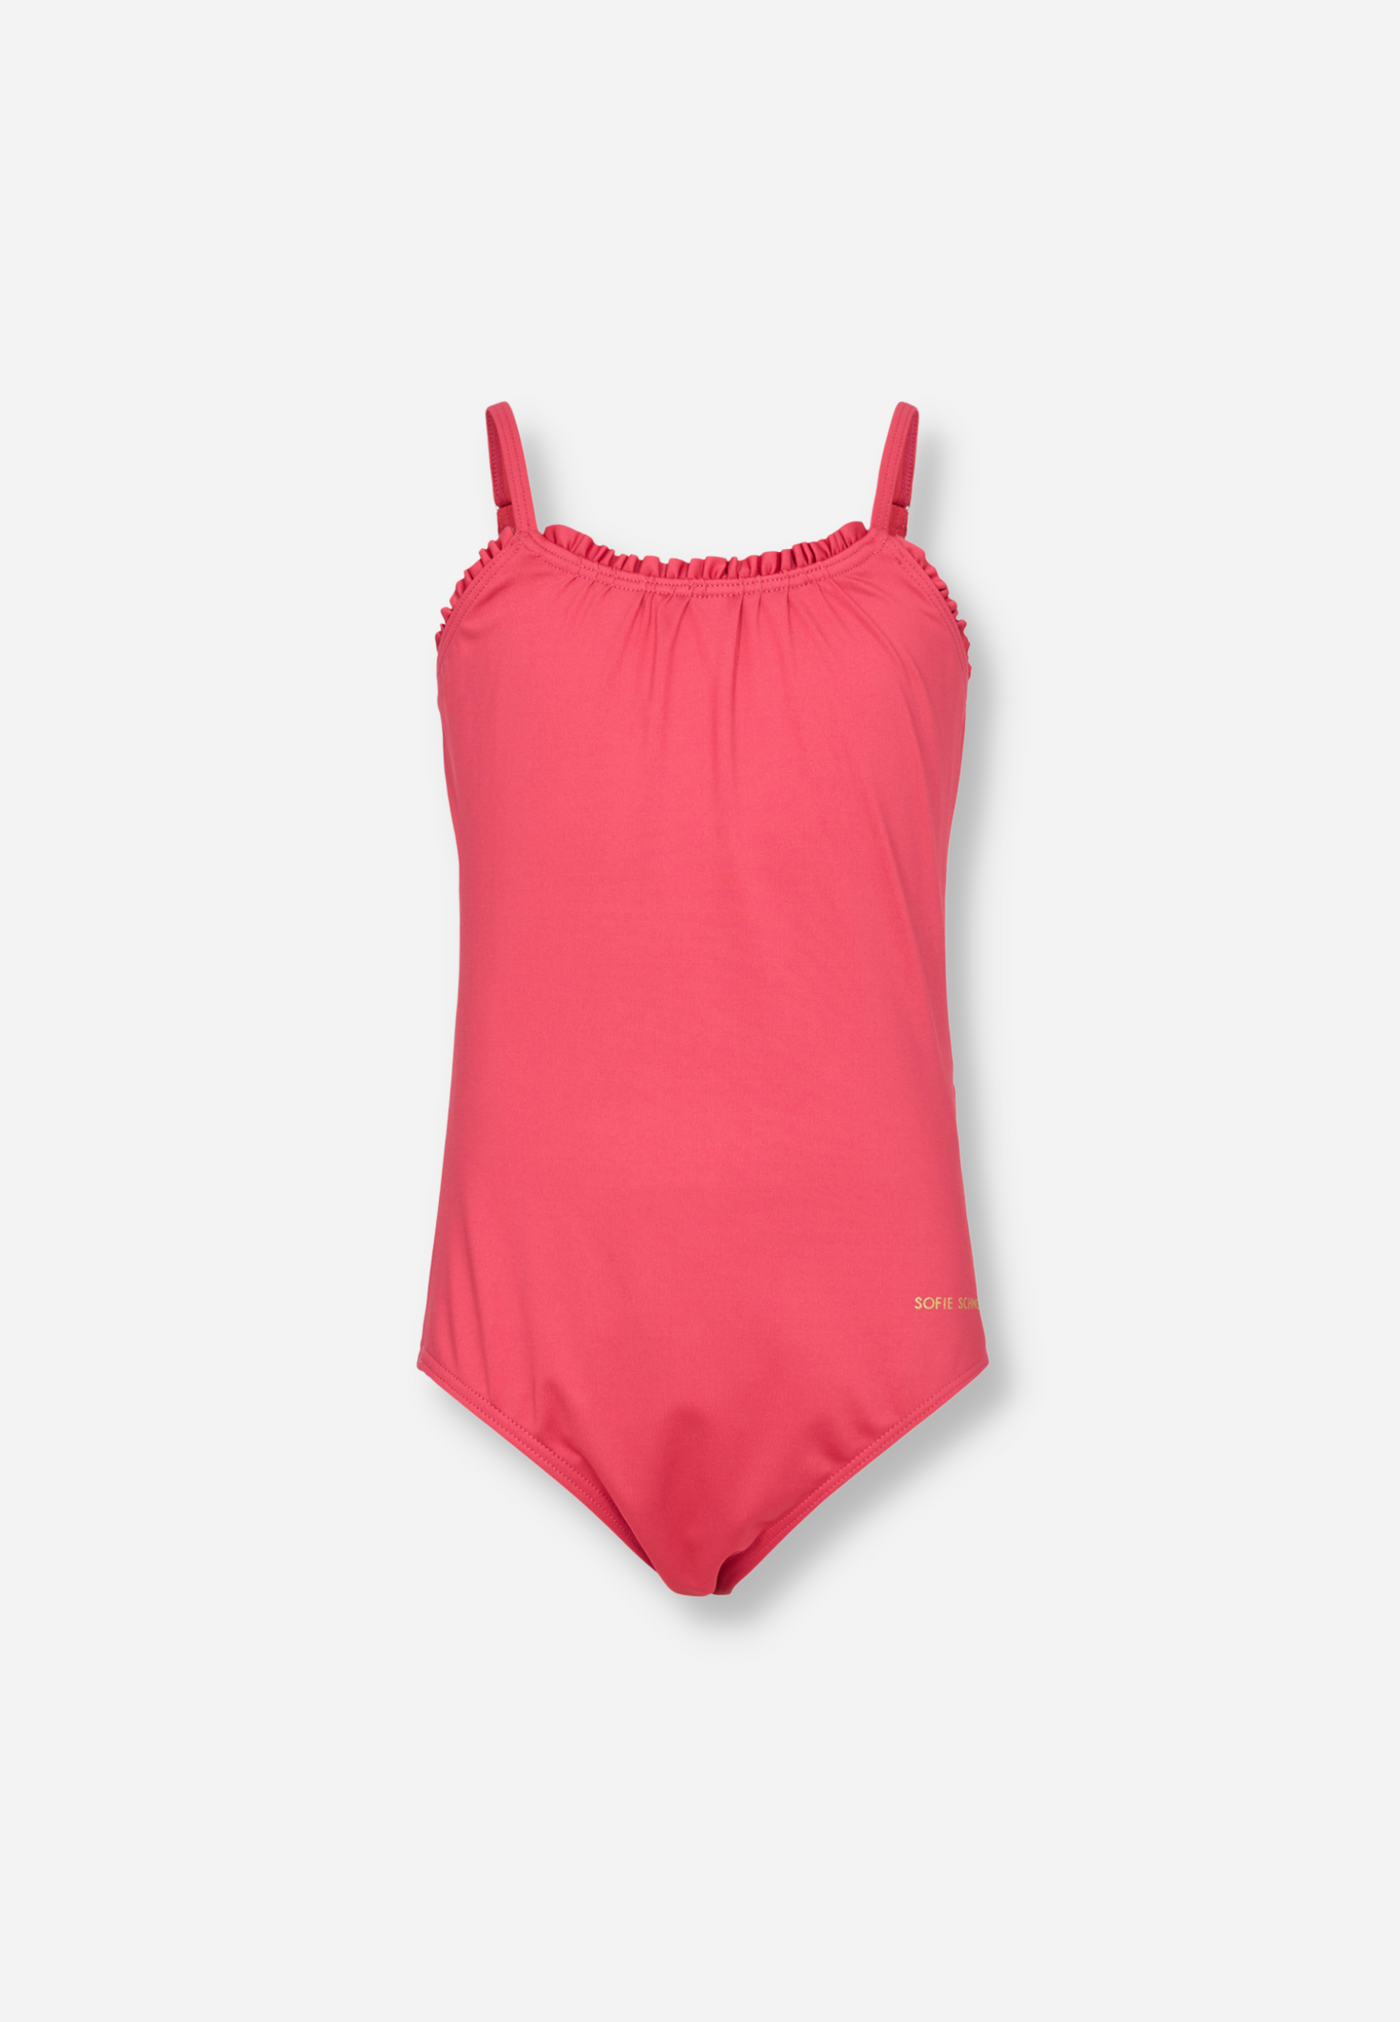 SWIMSUIT - BRIGHT PINK